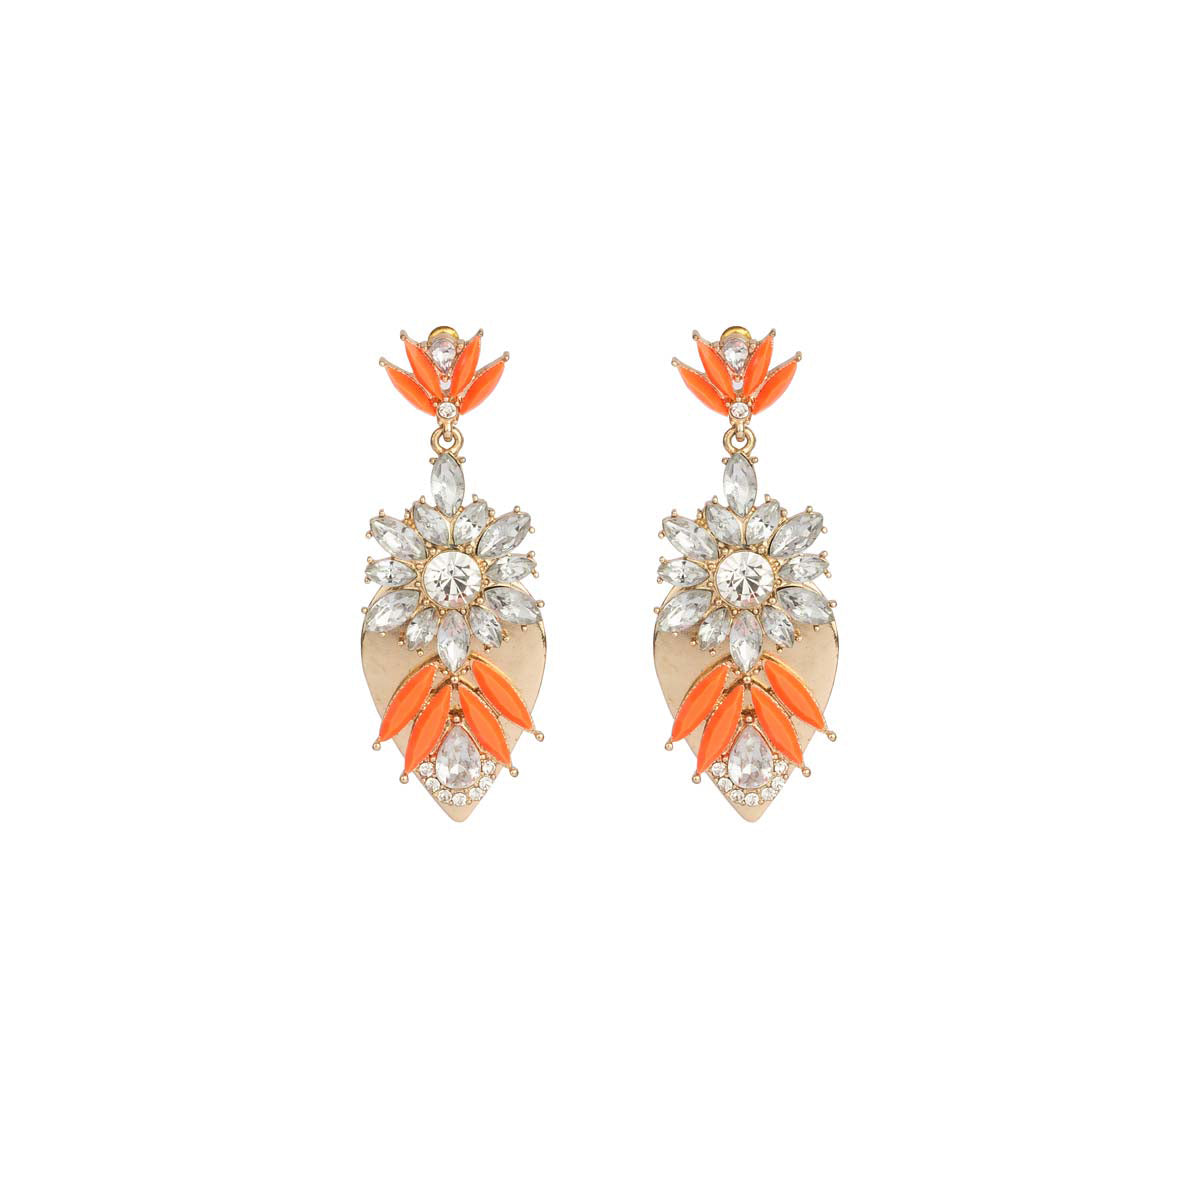 Dance the night away in this slice of summer orange & white earrings - set in mixed metal alloy and mounted like a muse on acrylic.